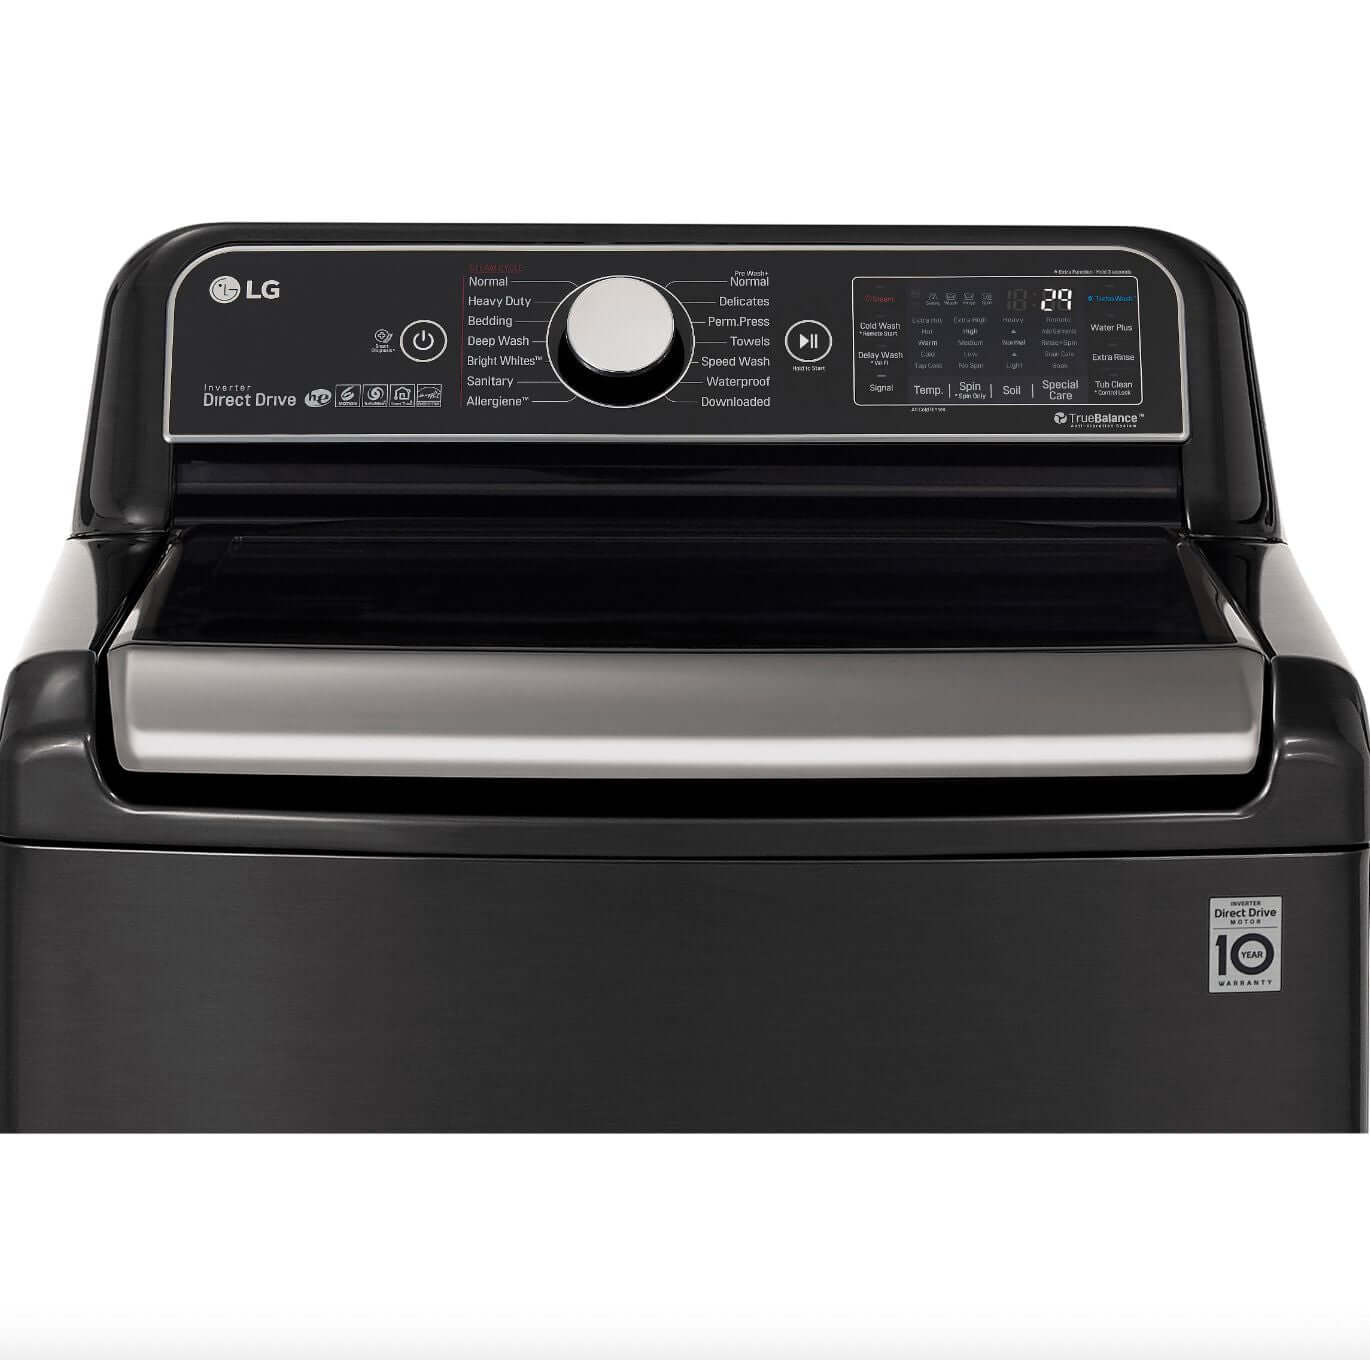 LG 27 Inch Smart wi-fi Enabled Top Load Washer with TurboWash3D Technology in Black Steel 5.5 cu. ft. (WT7900HBA)